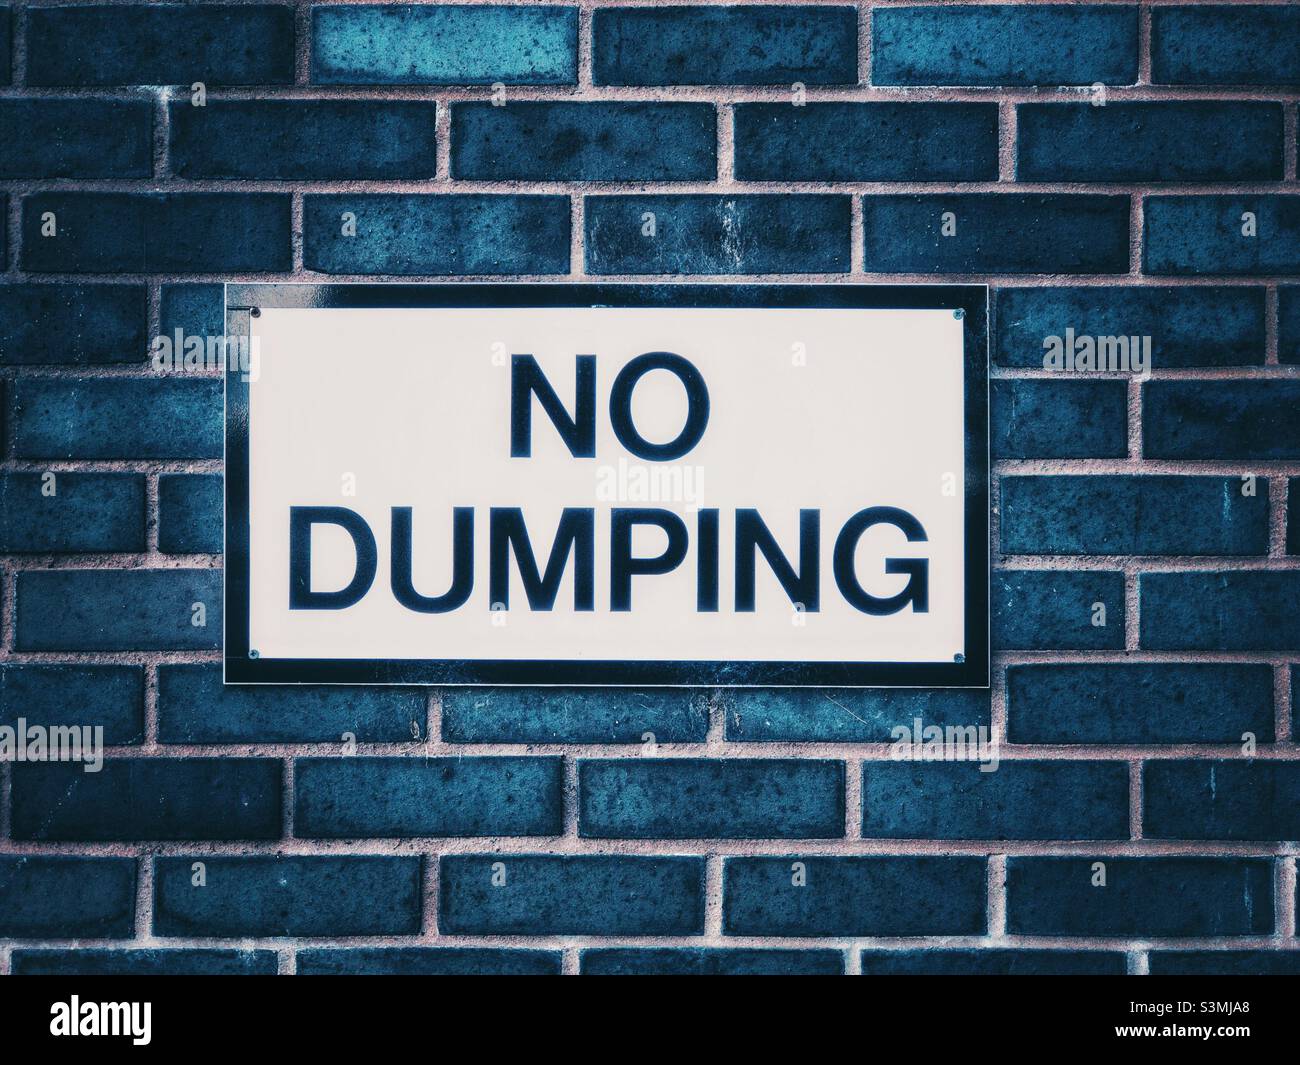 No Dumping sign on a brick wall in a car park. Stock Photo